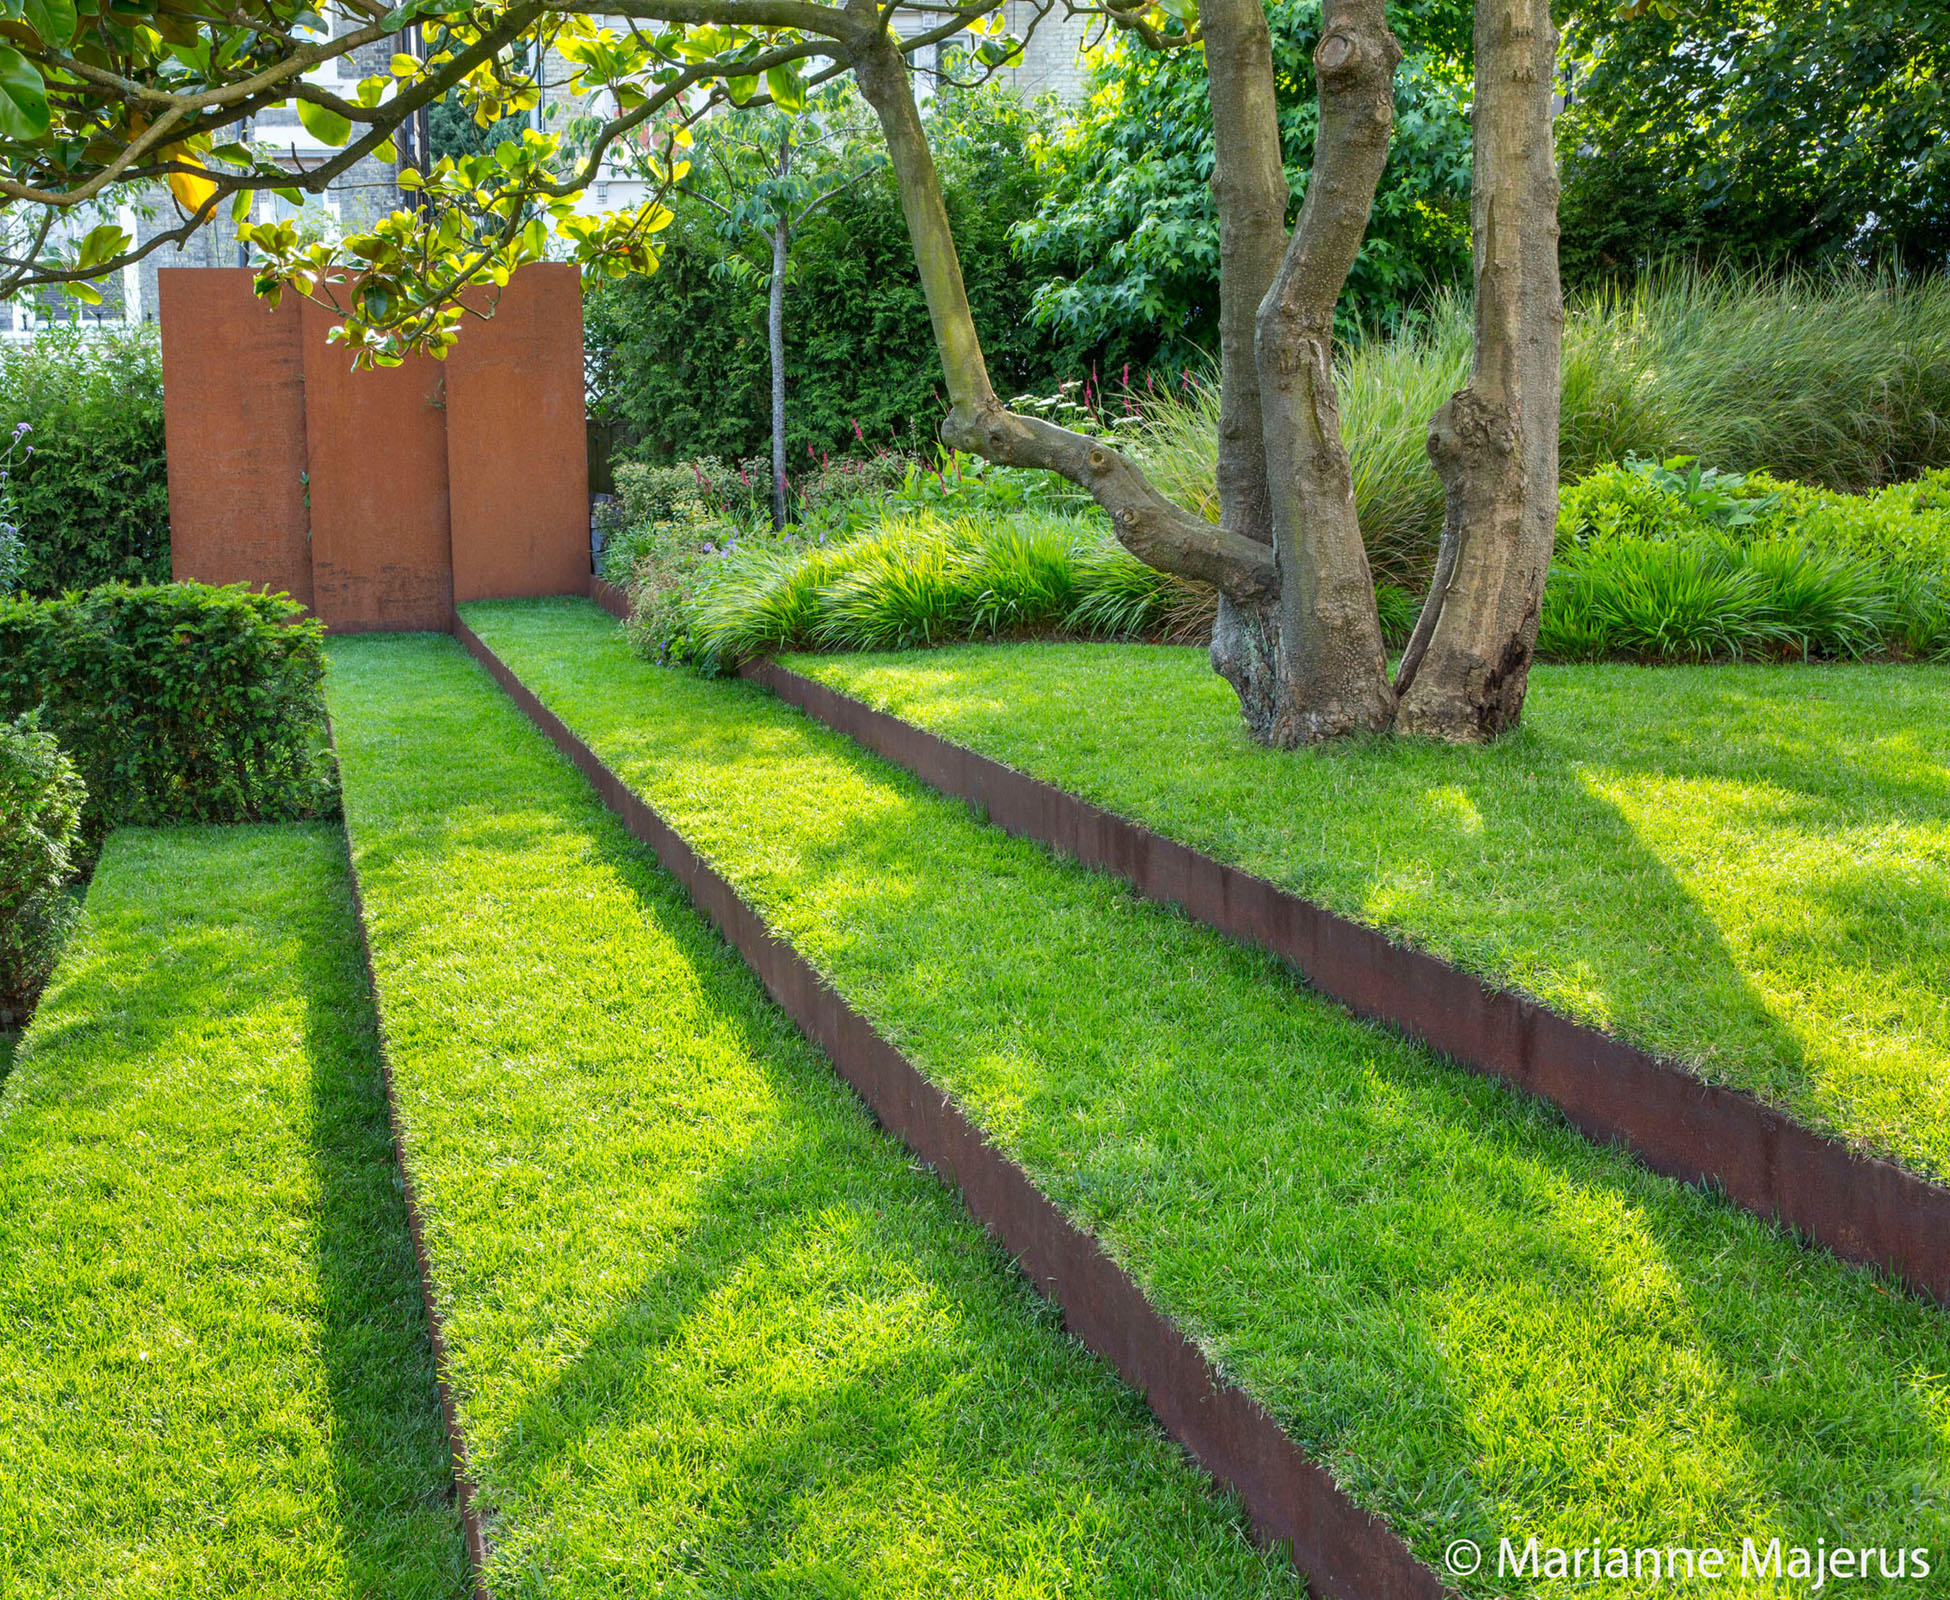 The turf steps and corten risers draw your eye to the feature panels in front of the yew hedge.